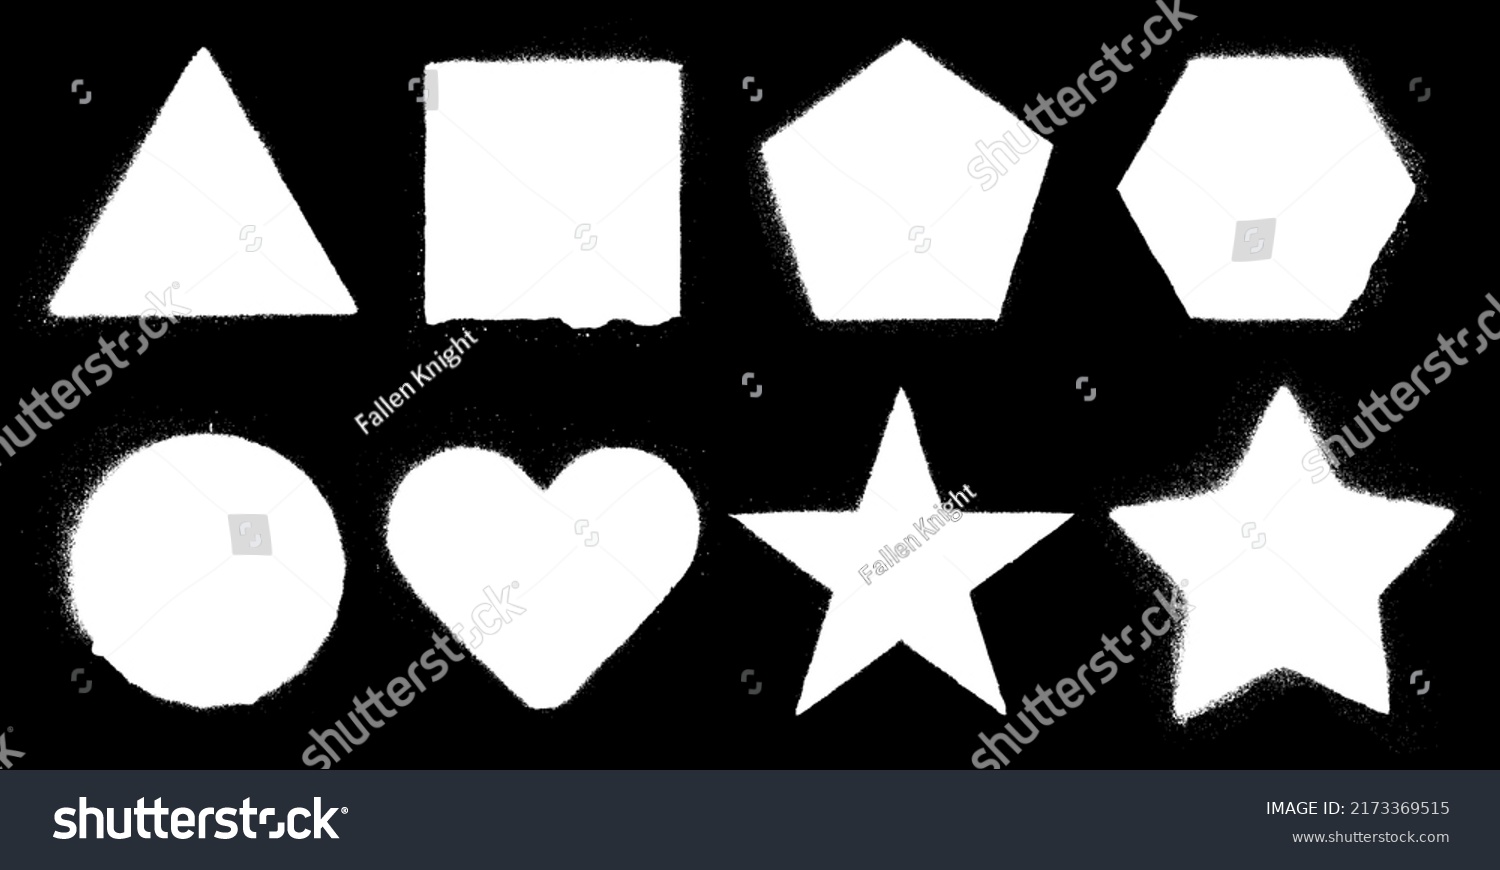 SVG of Geometric stencil spray paint shapes. Circle, triangle, square, pentagon, hexagon, heart, star. Airbrush graffiti stamps, stencil paint with rusty edges. Eps10 vector svg